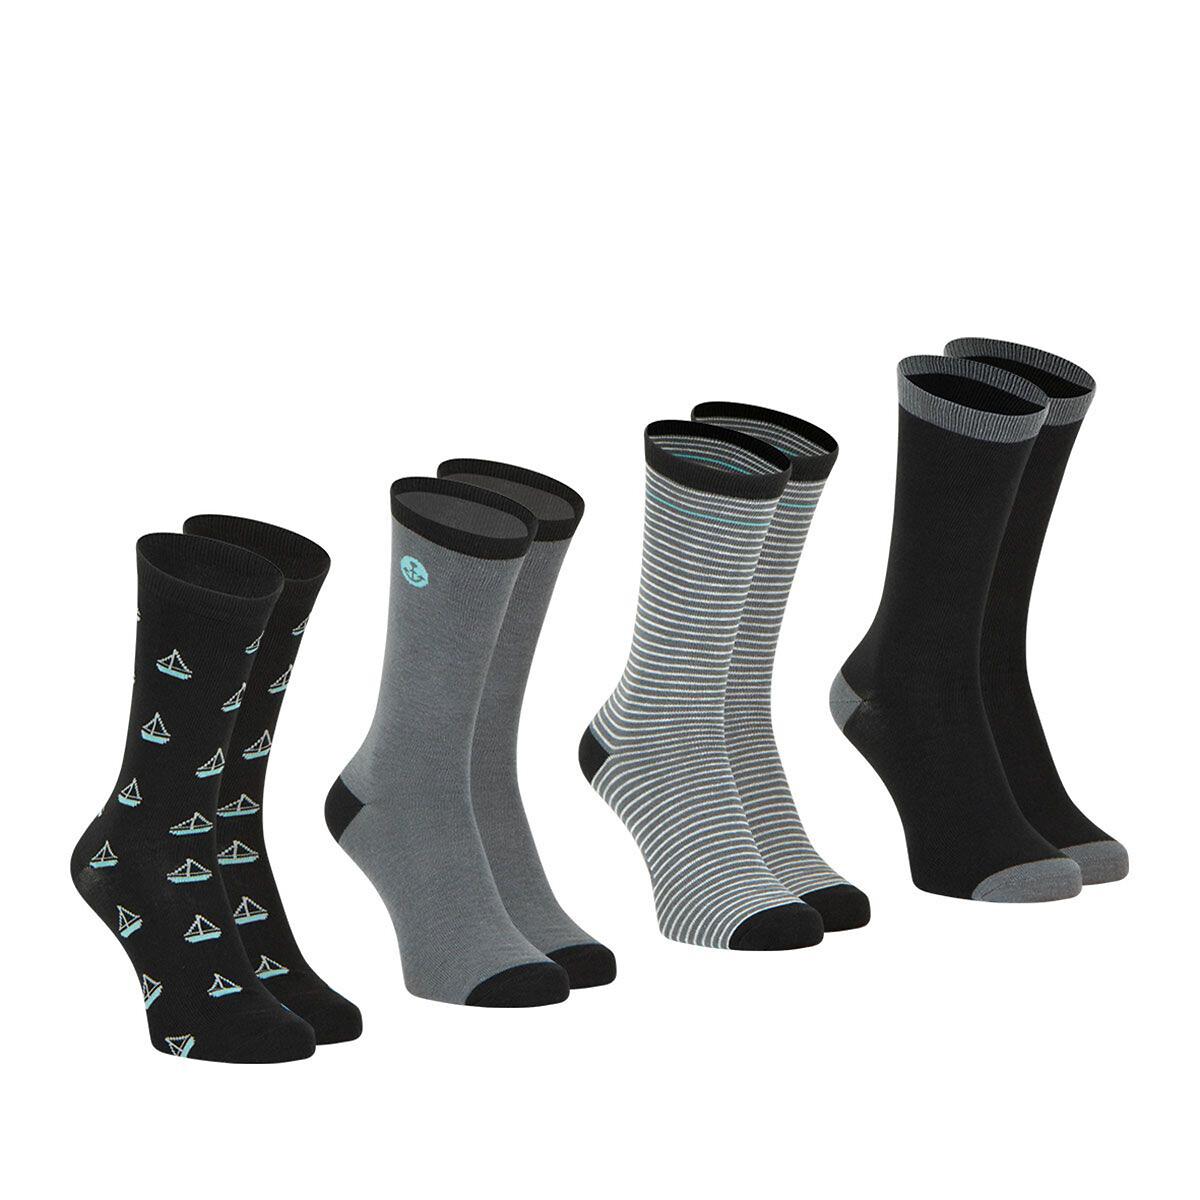 Pack of 4 Pairs of Patterned Crew Socks